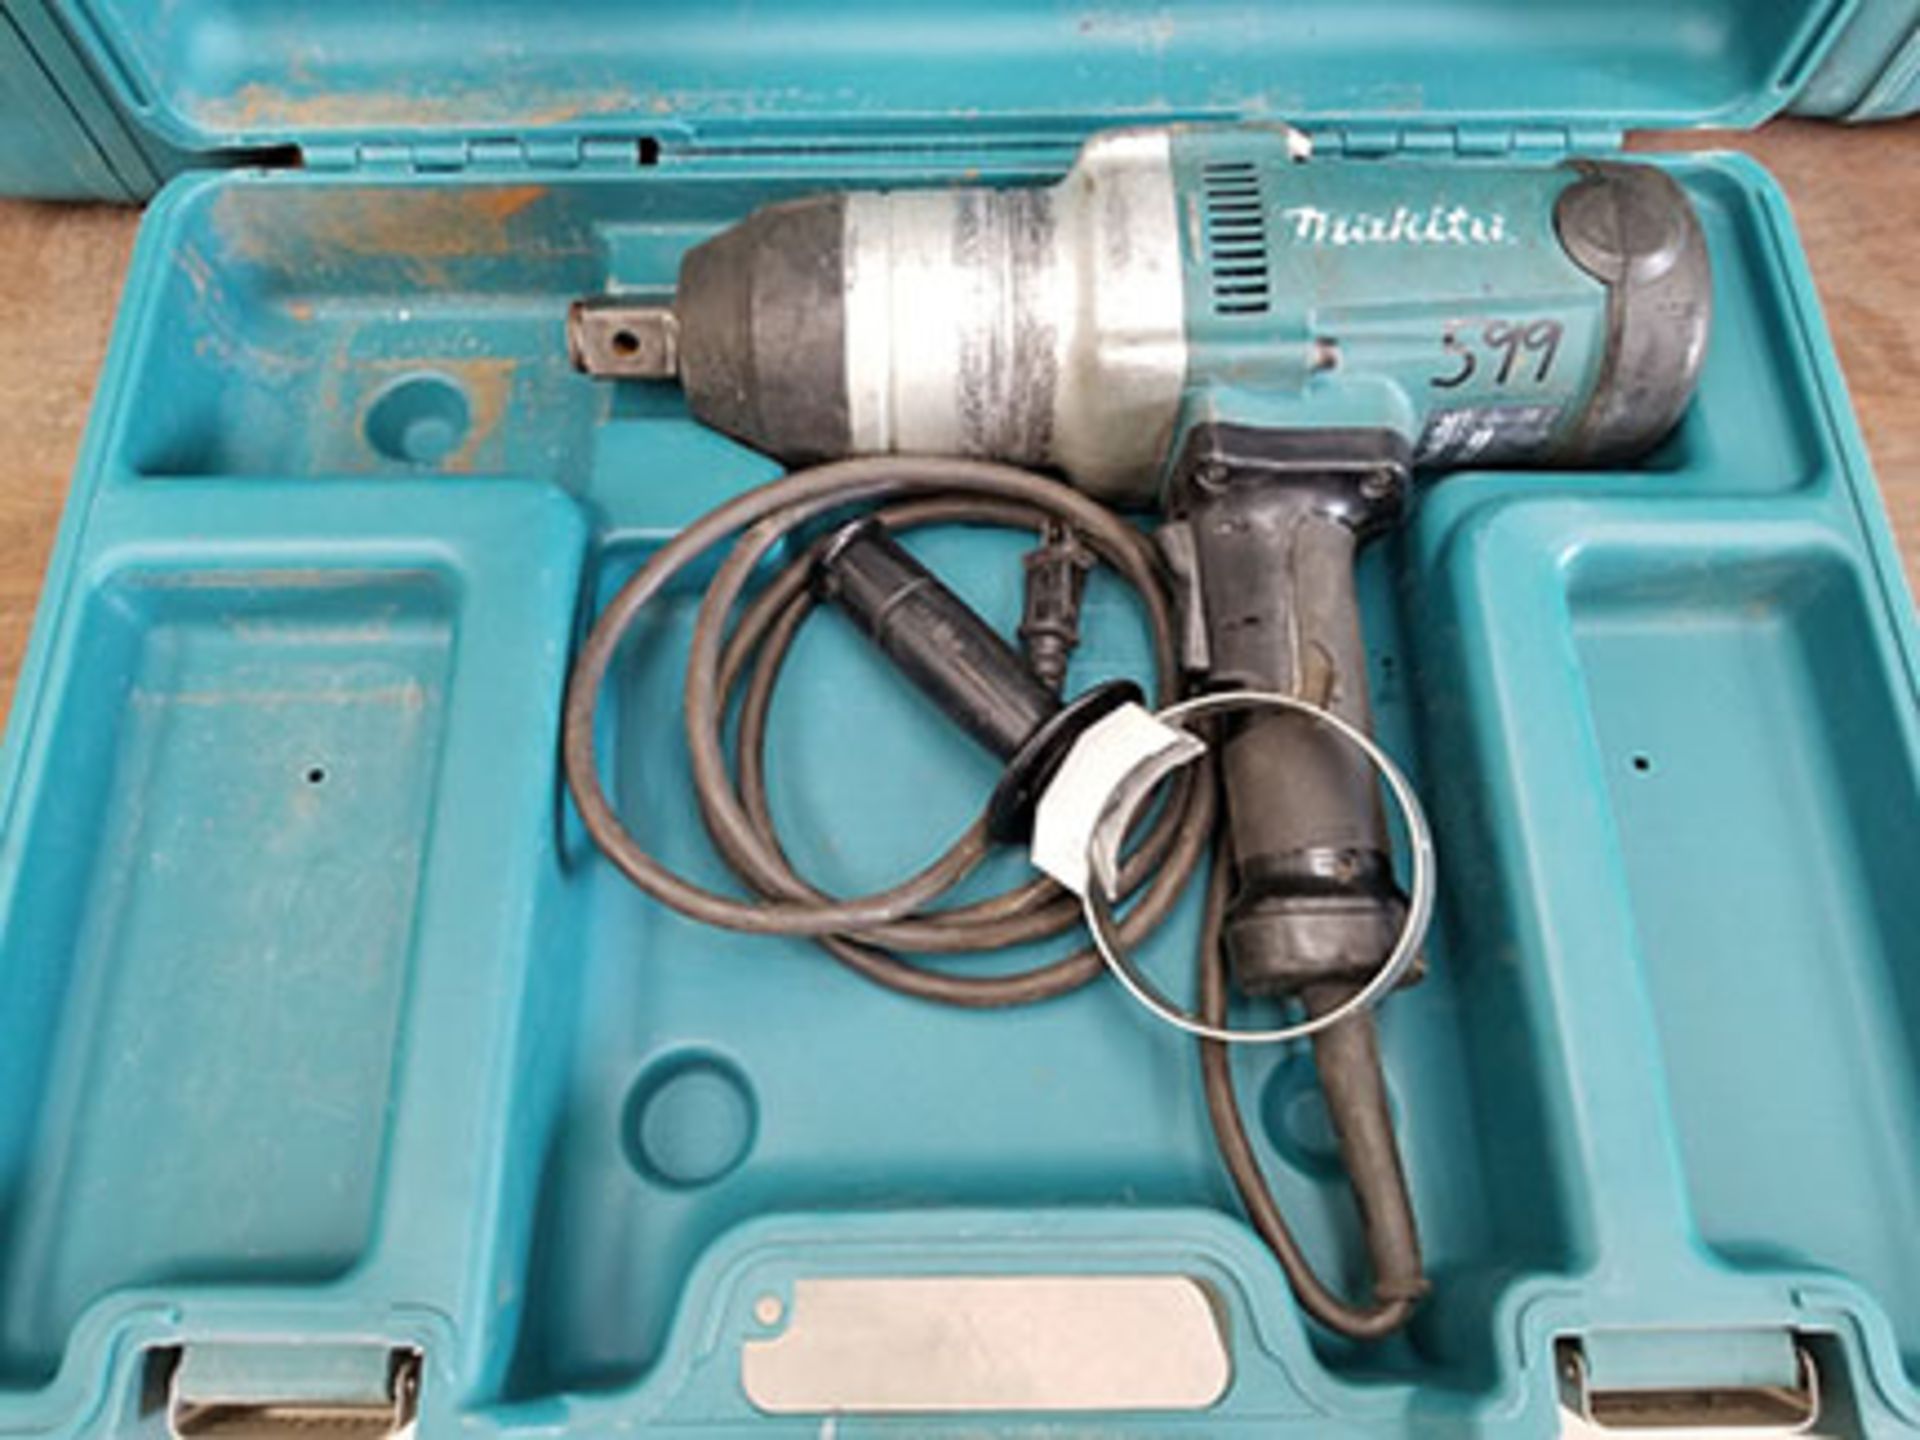 MAKITA TW1000 120V ELECTRIC IMPACT WRENCH, 1” DRIVE - Image 2 of 3